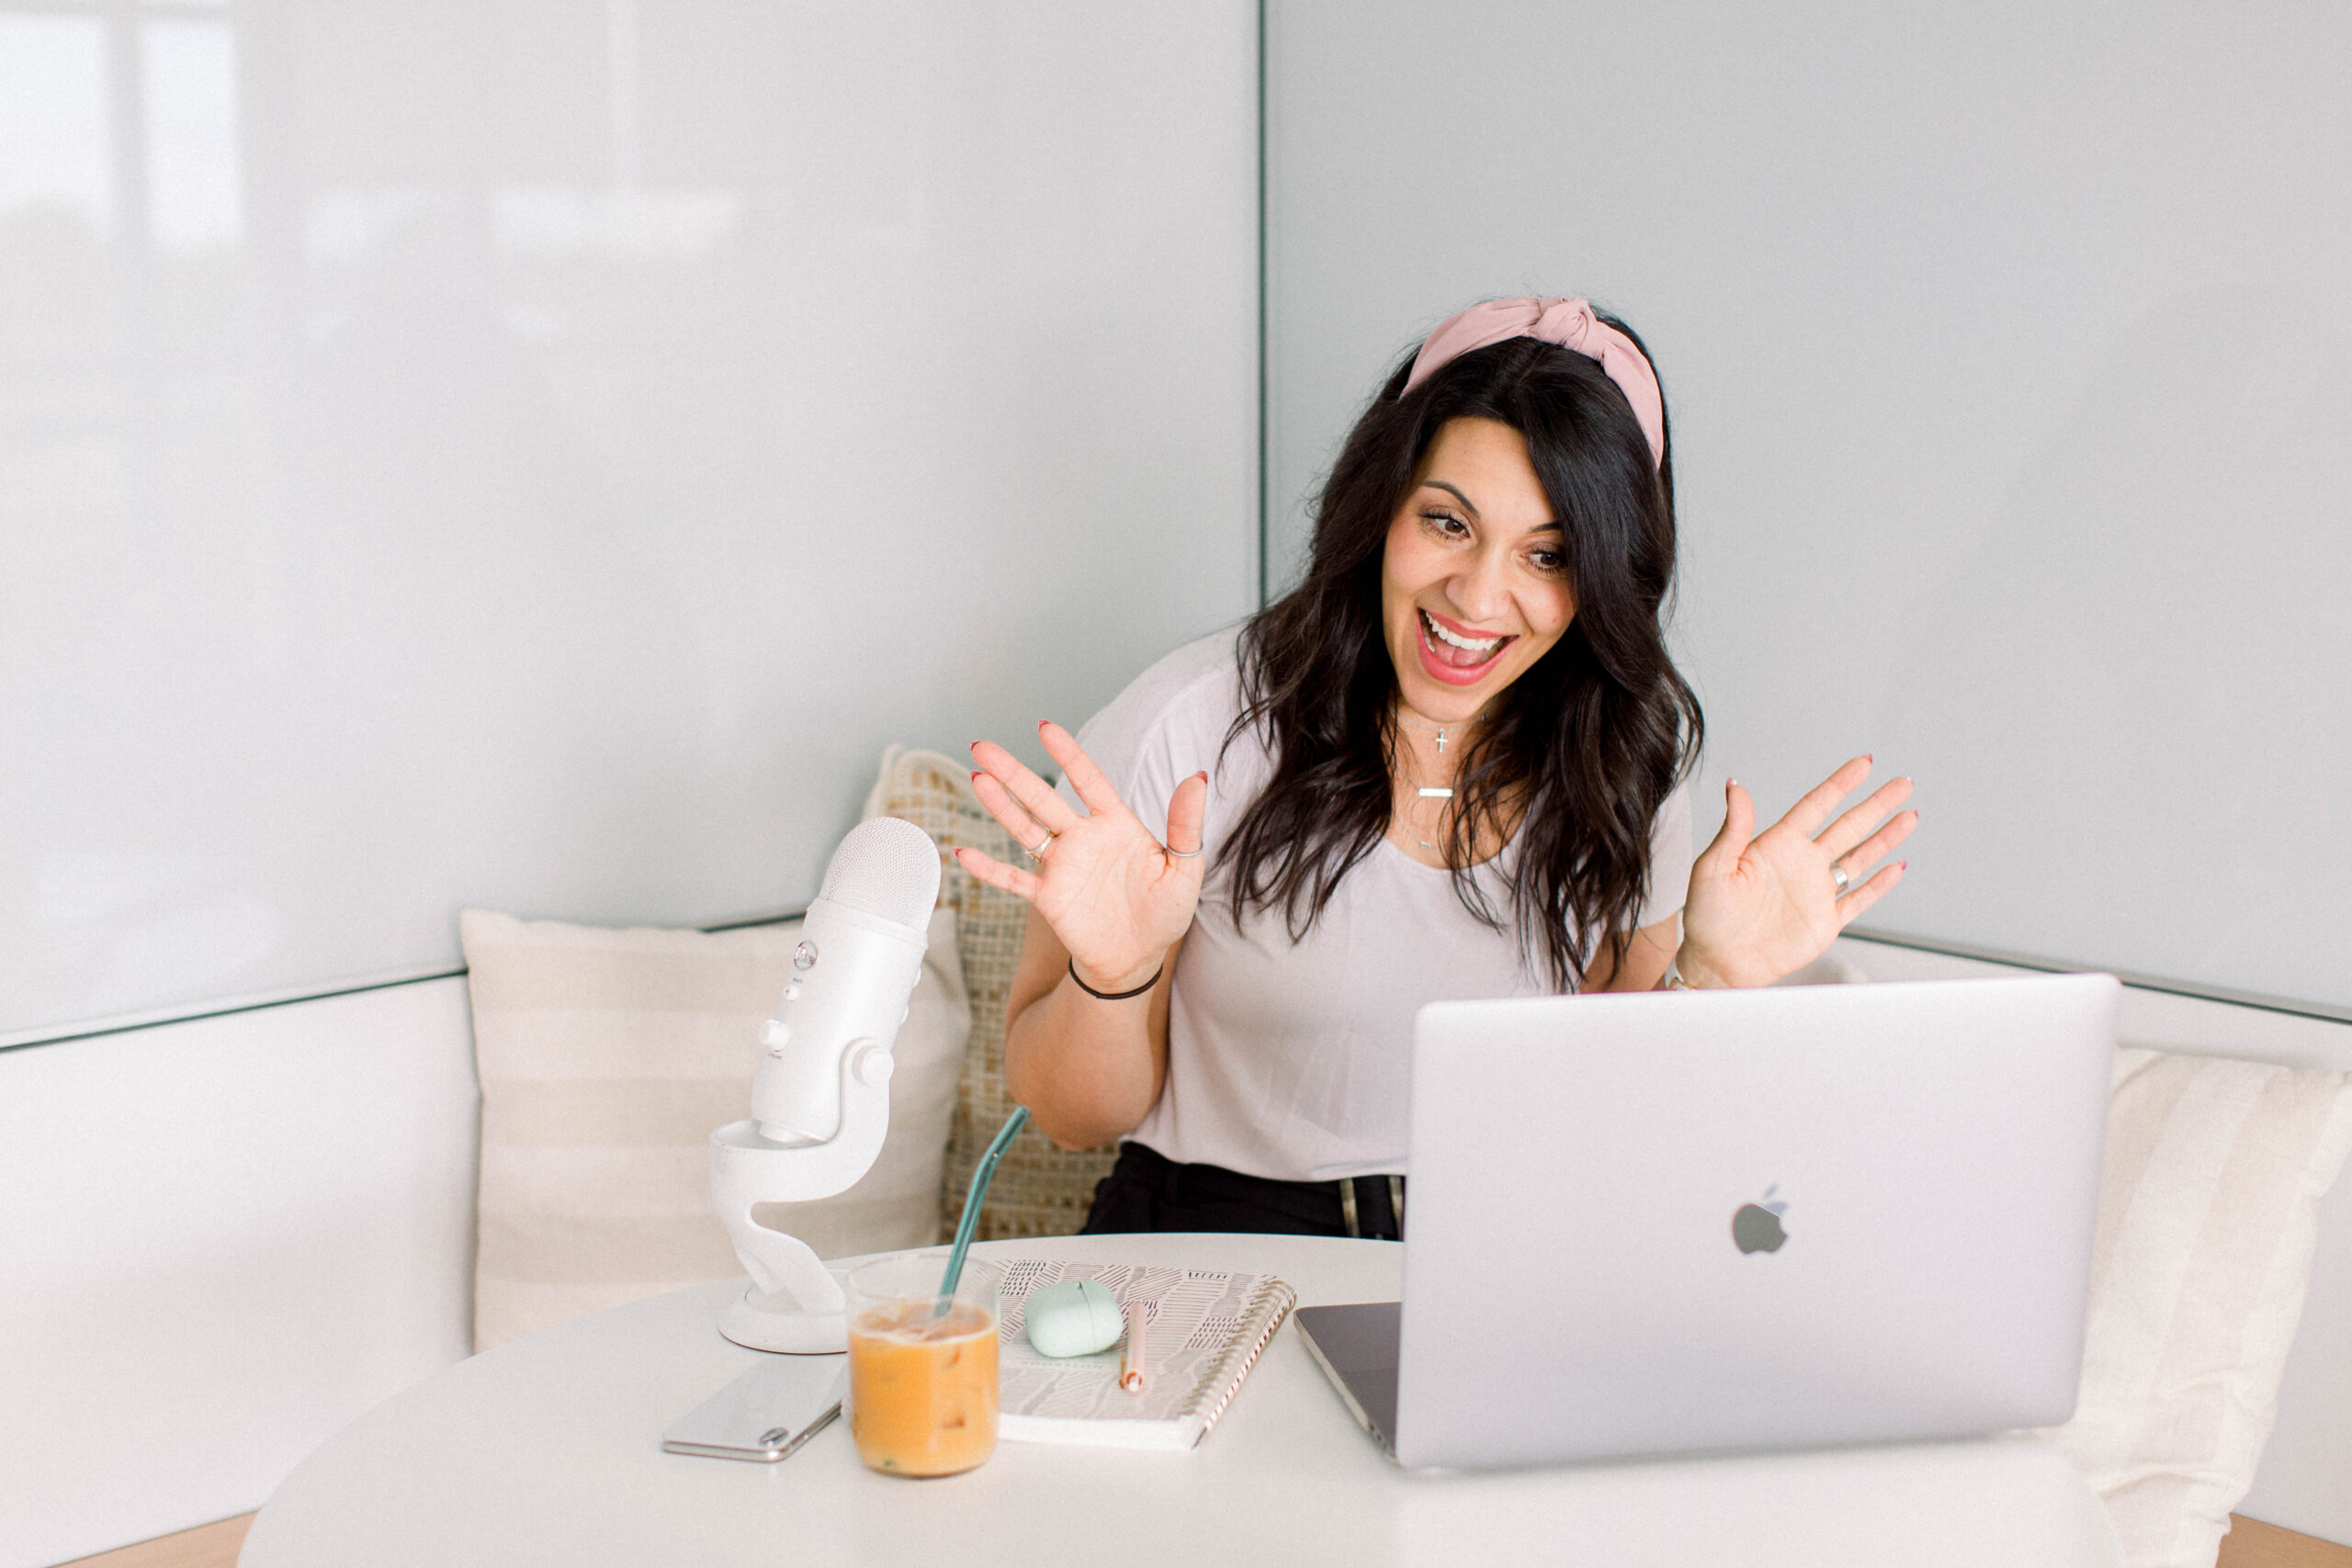 dark haired woman with a pink headband sitting at a table. She is in front of a laptop, smiling toward the screen, smiling and has both hands palms forward, showing all ten fingers. She has a notebook and pen next to the laptopn with a glass of juice and a white microphone.